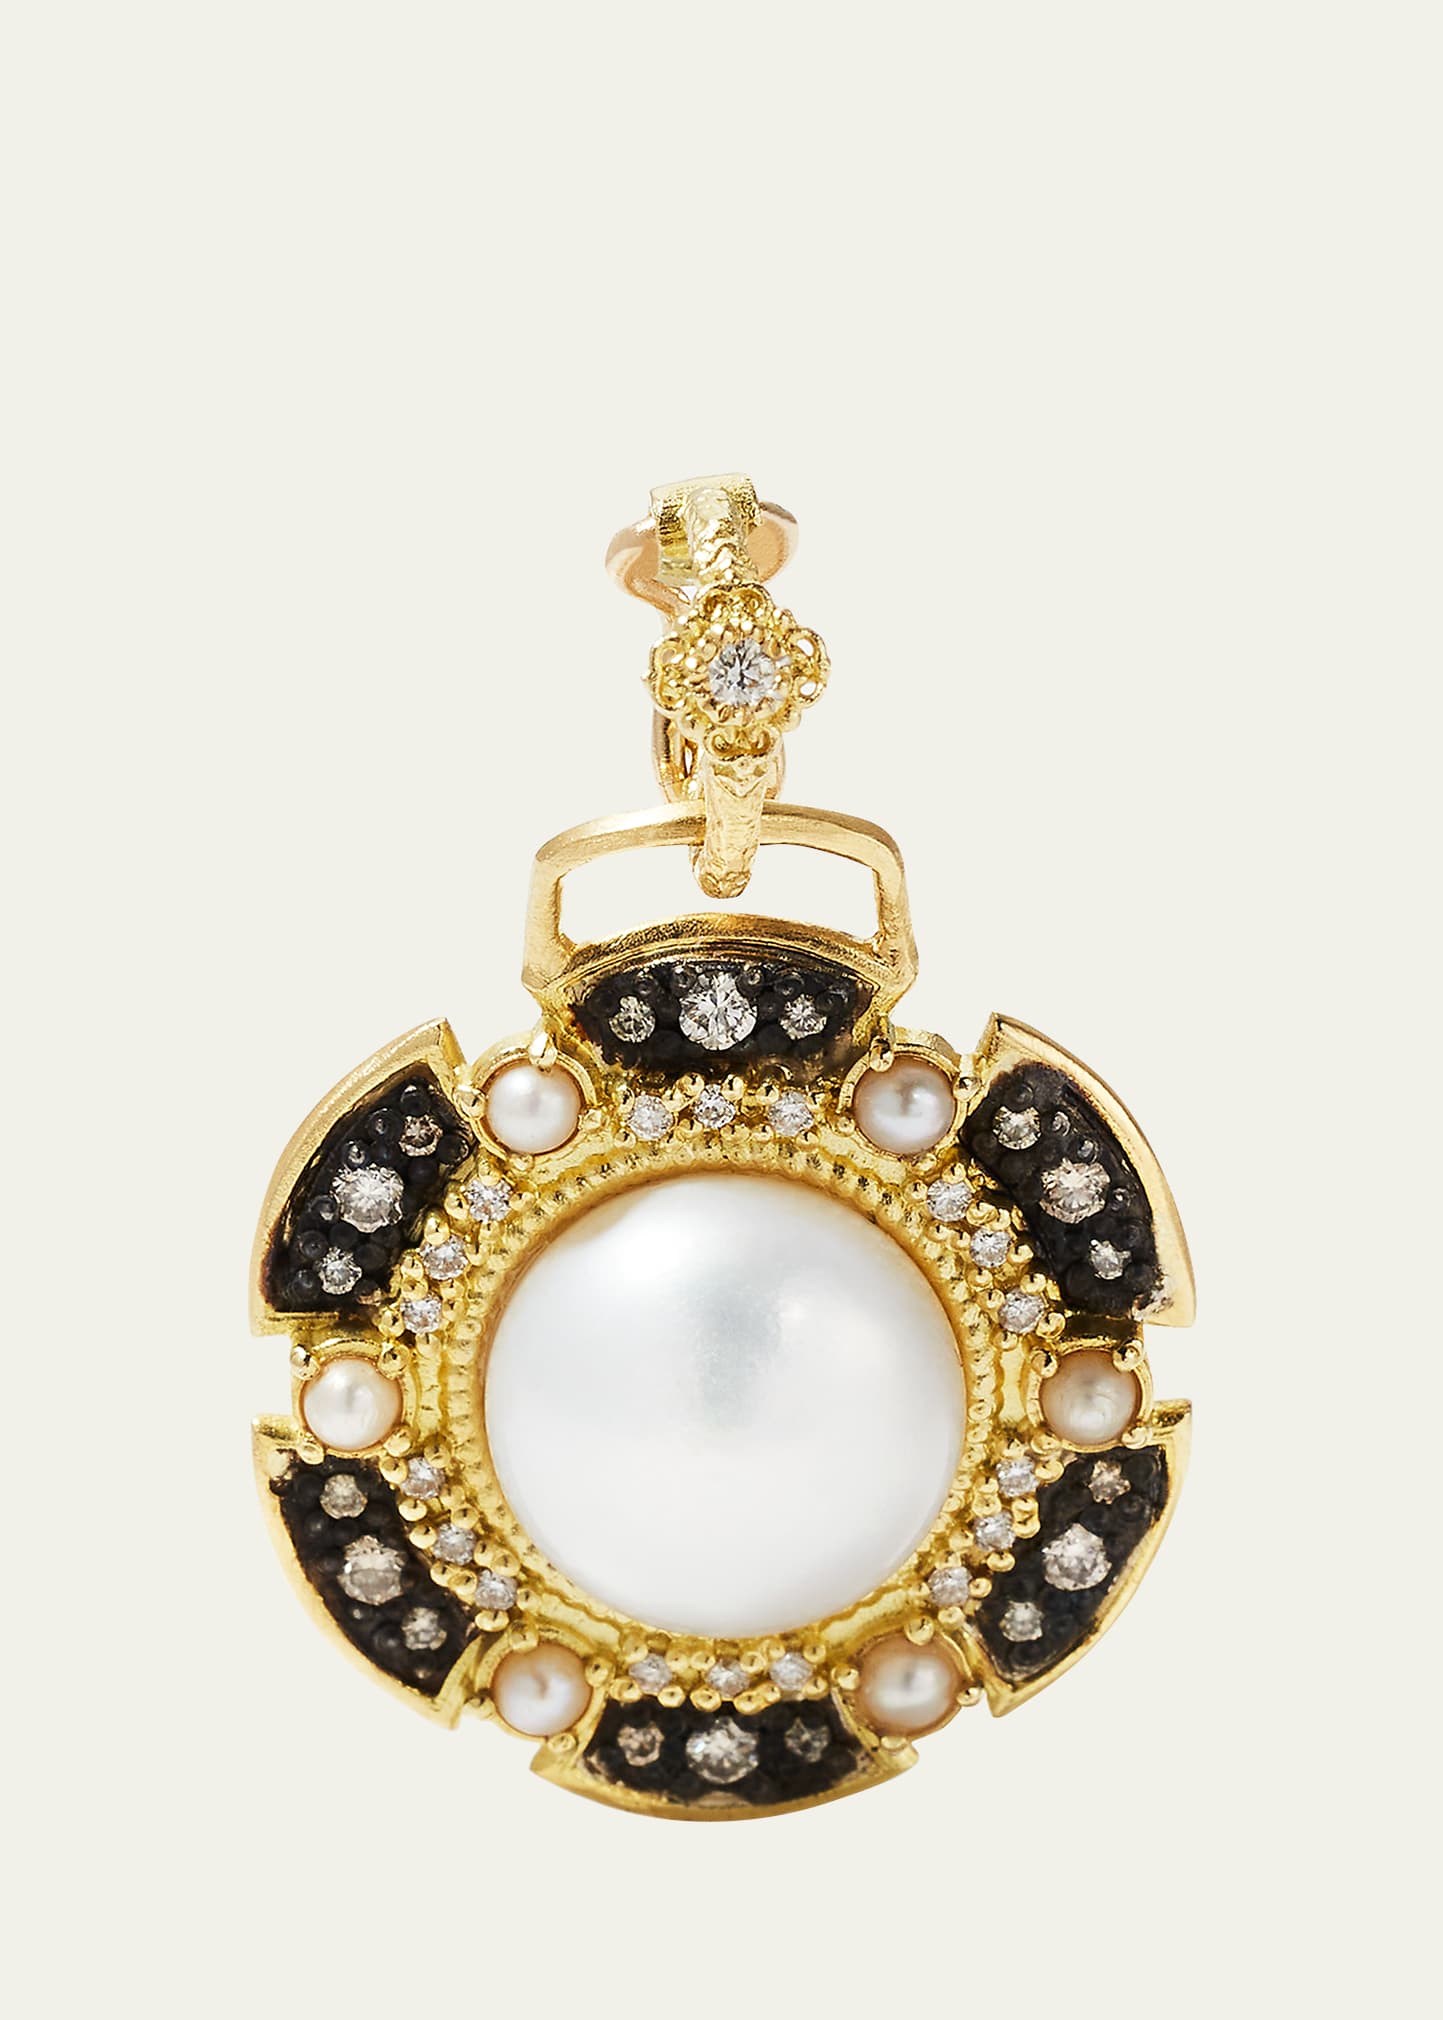 Armenta Old World 11mm Round Pearl Enhancer with Diamonds and Pearls